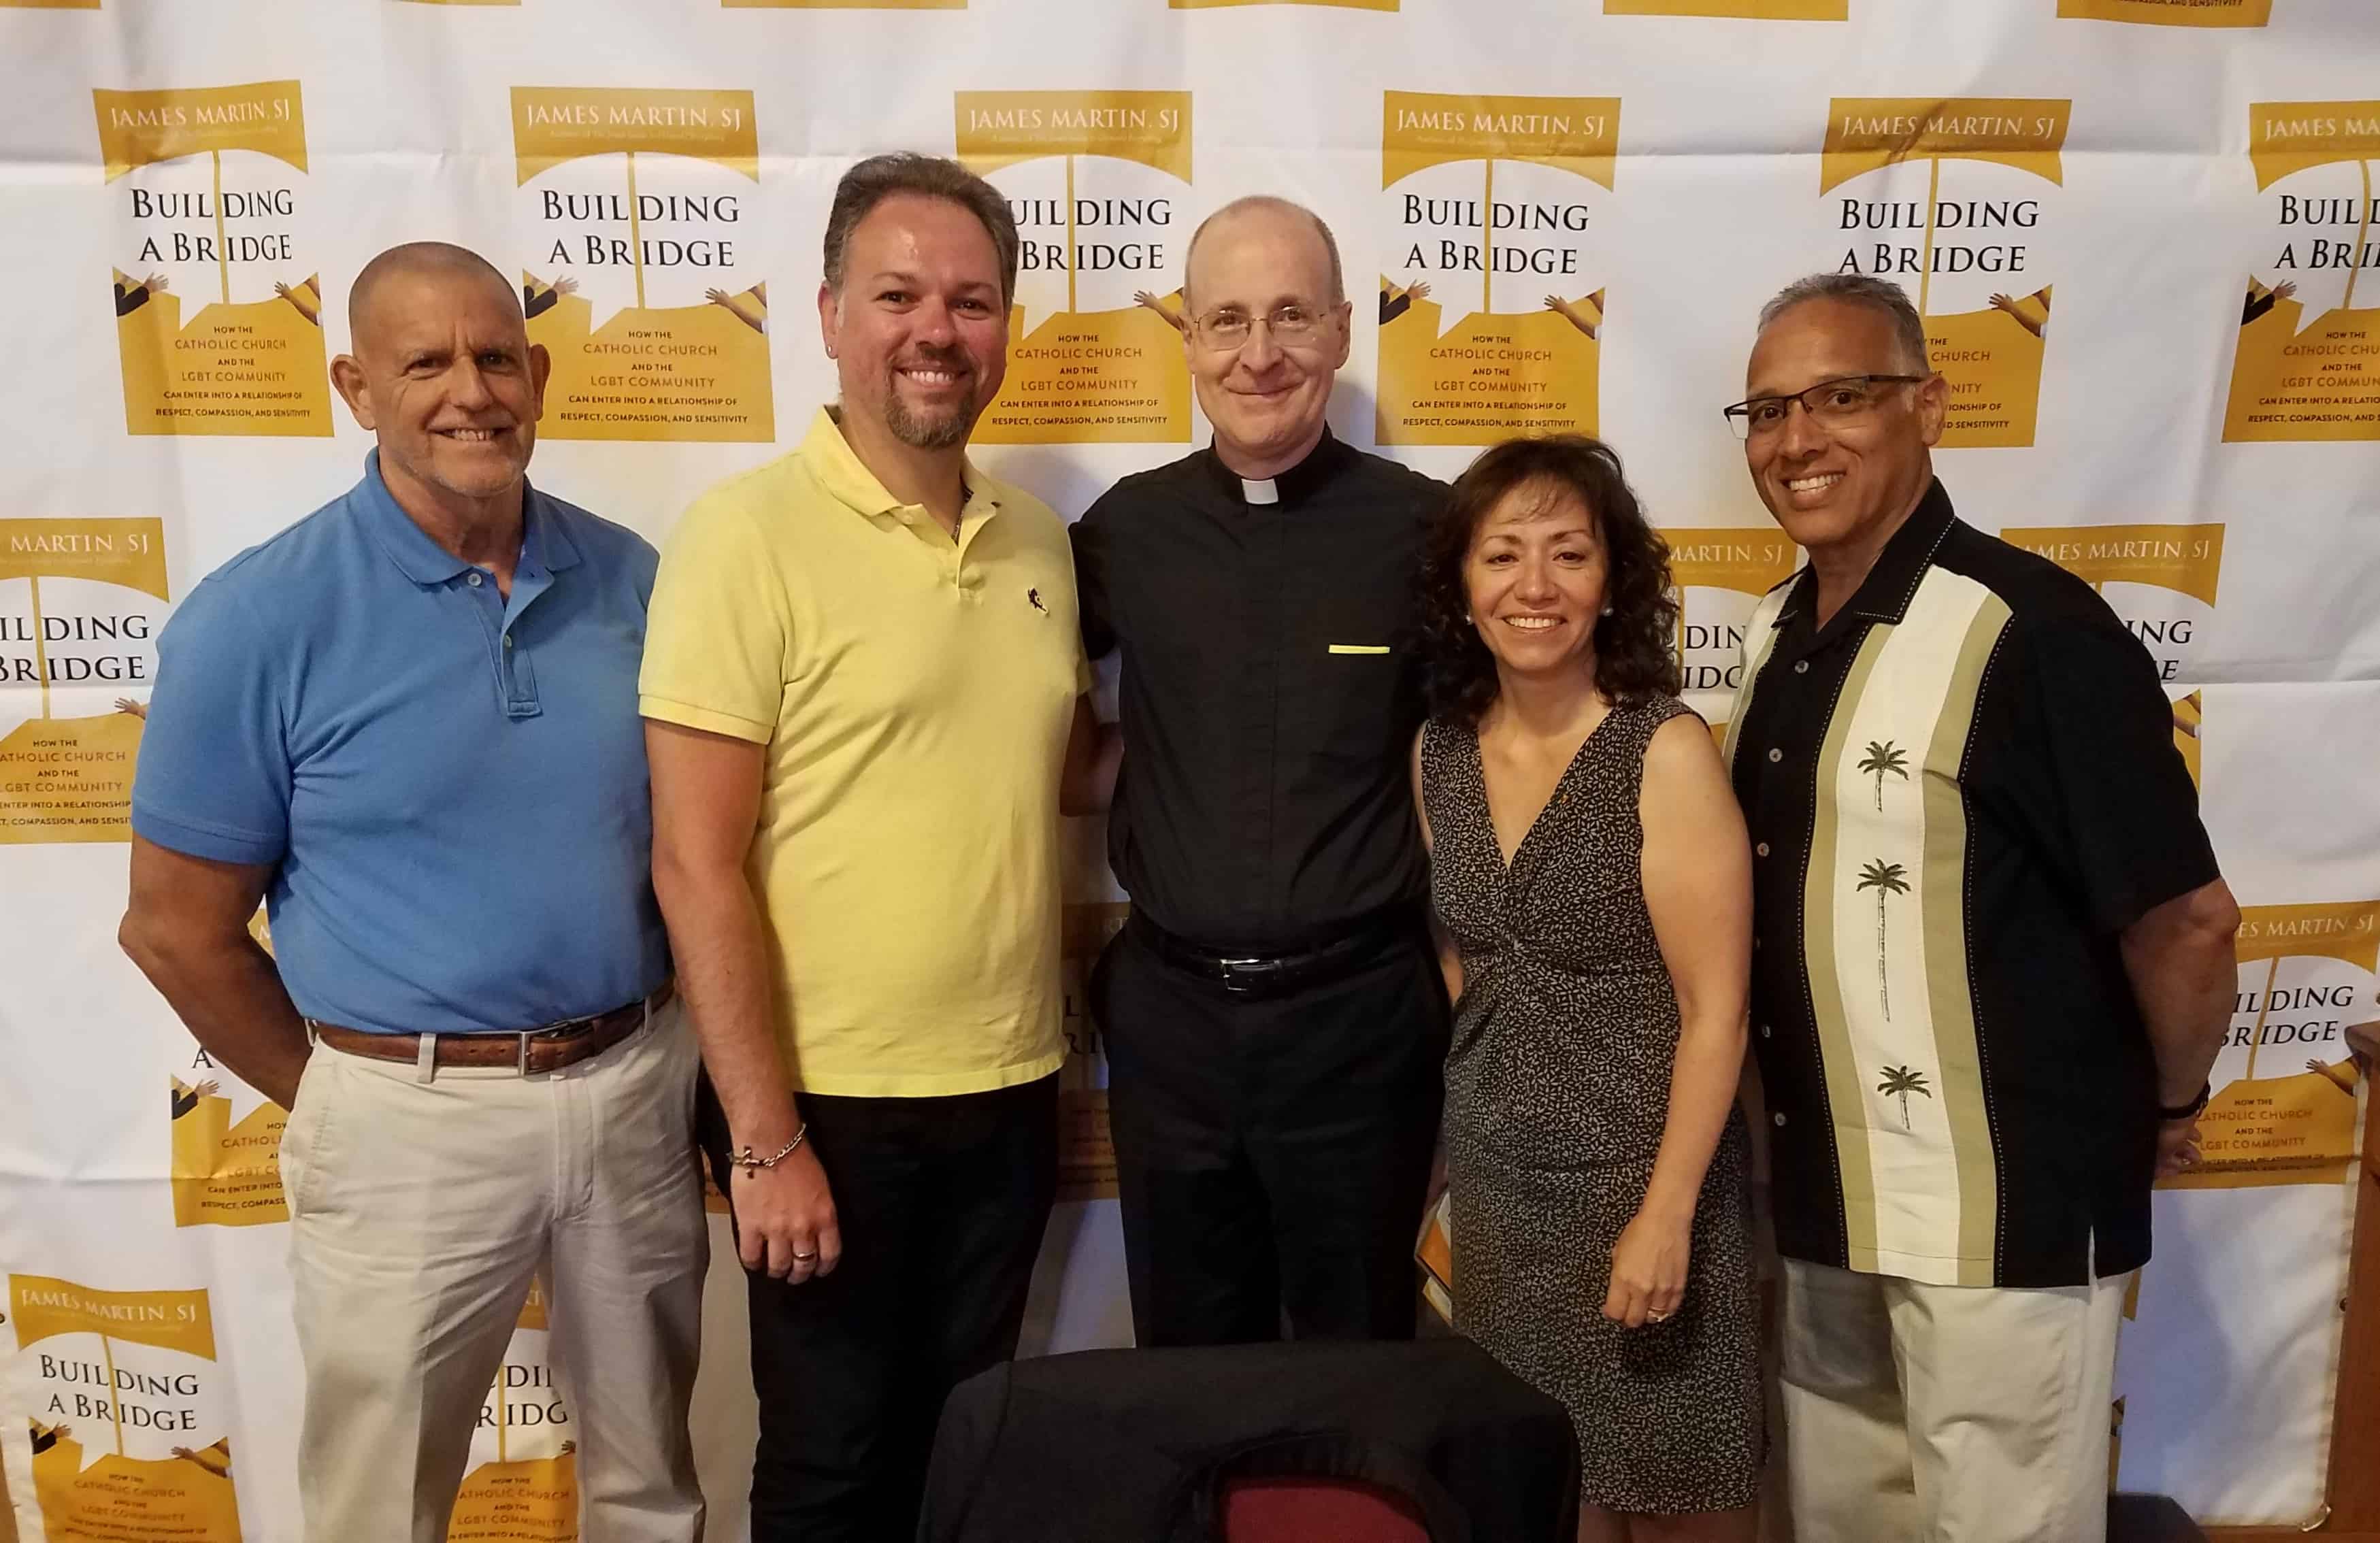 Bridging Truth and Love: An Interview with James Martin, SJ